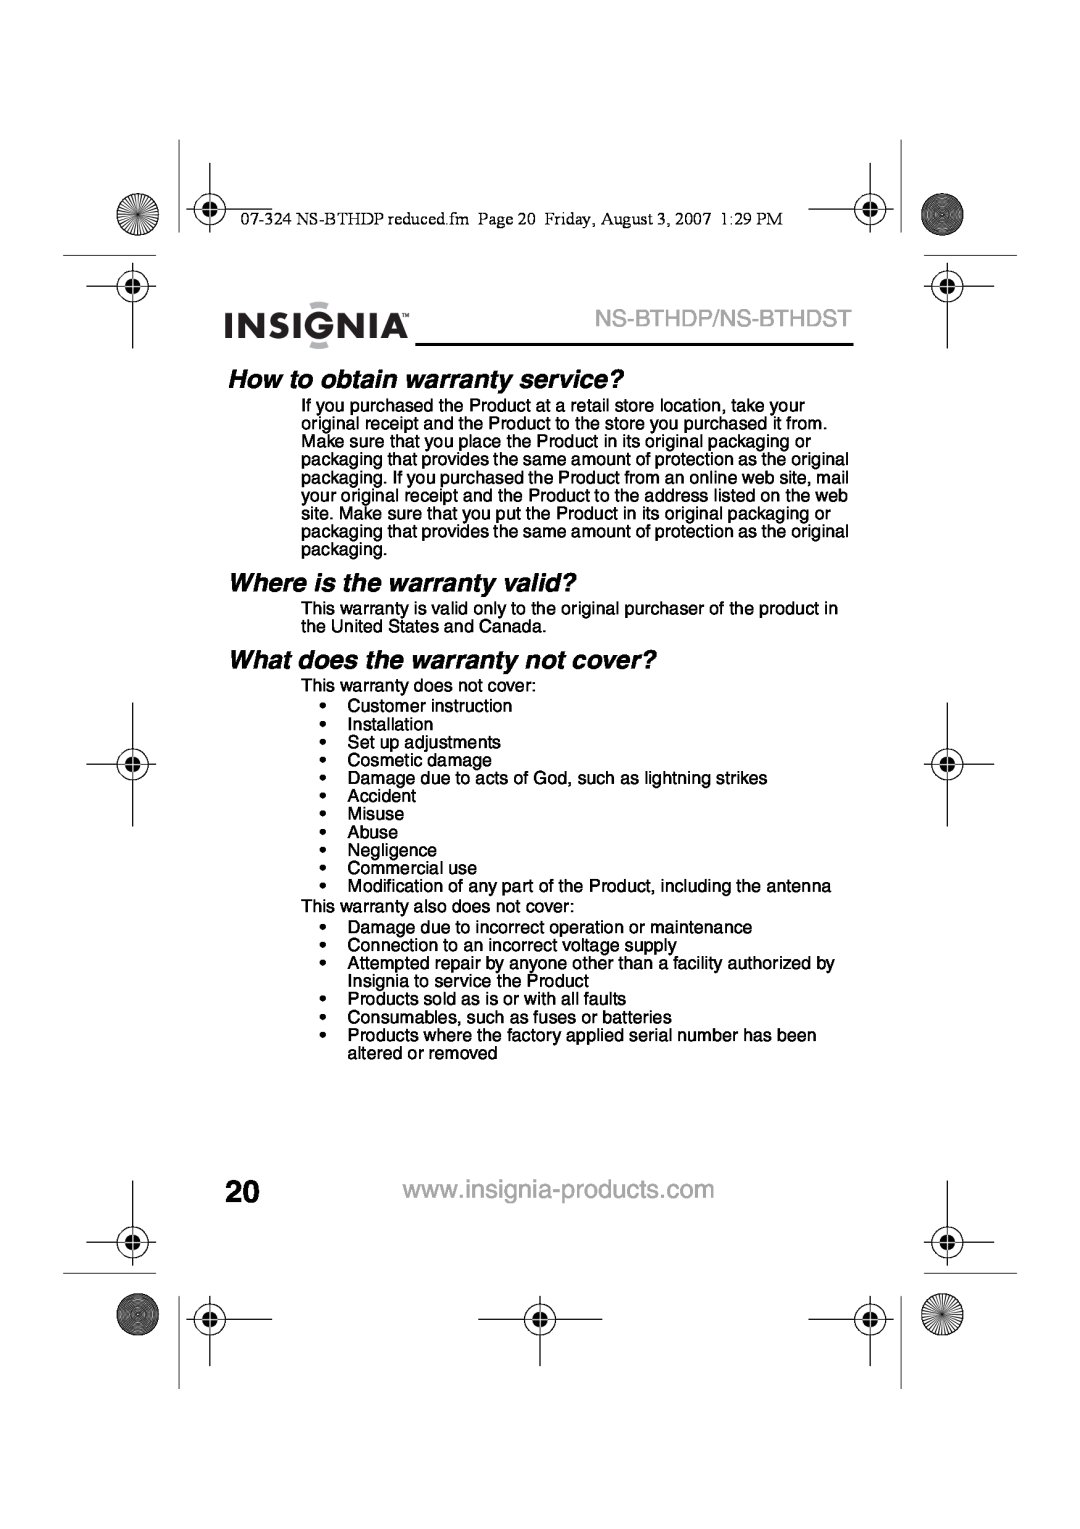 Insignia NS-BTHDST manual How to obtain warranty service?, Where is the warranty valid?, What does the warranty not cover? 